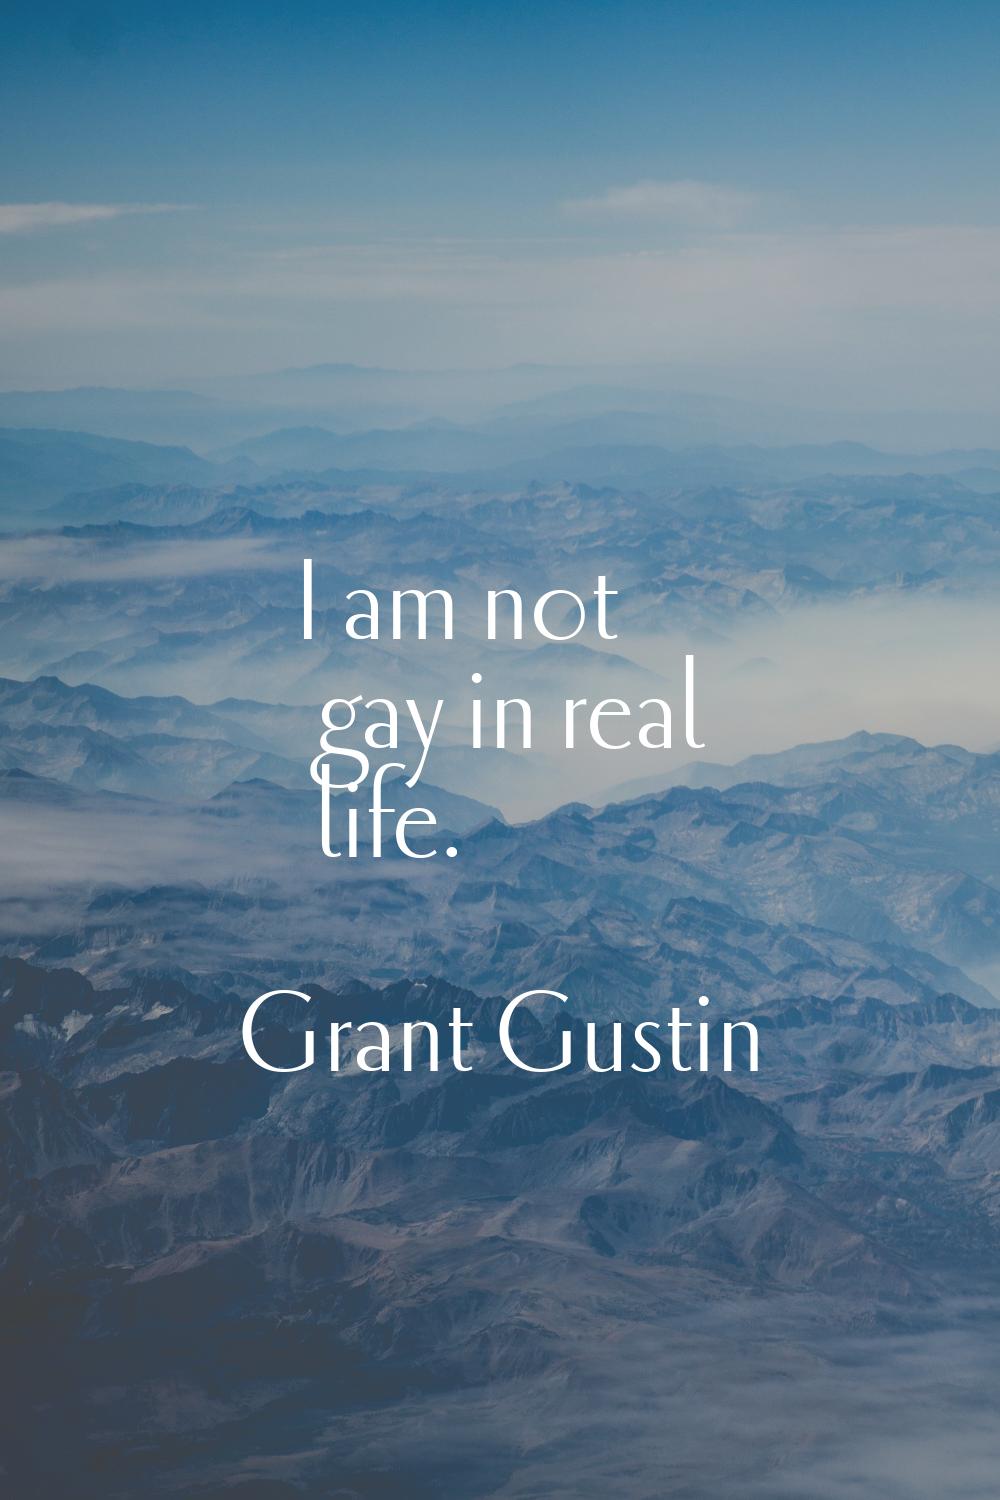 I am not gay in real life.